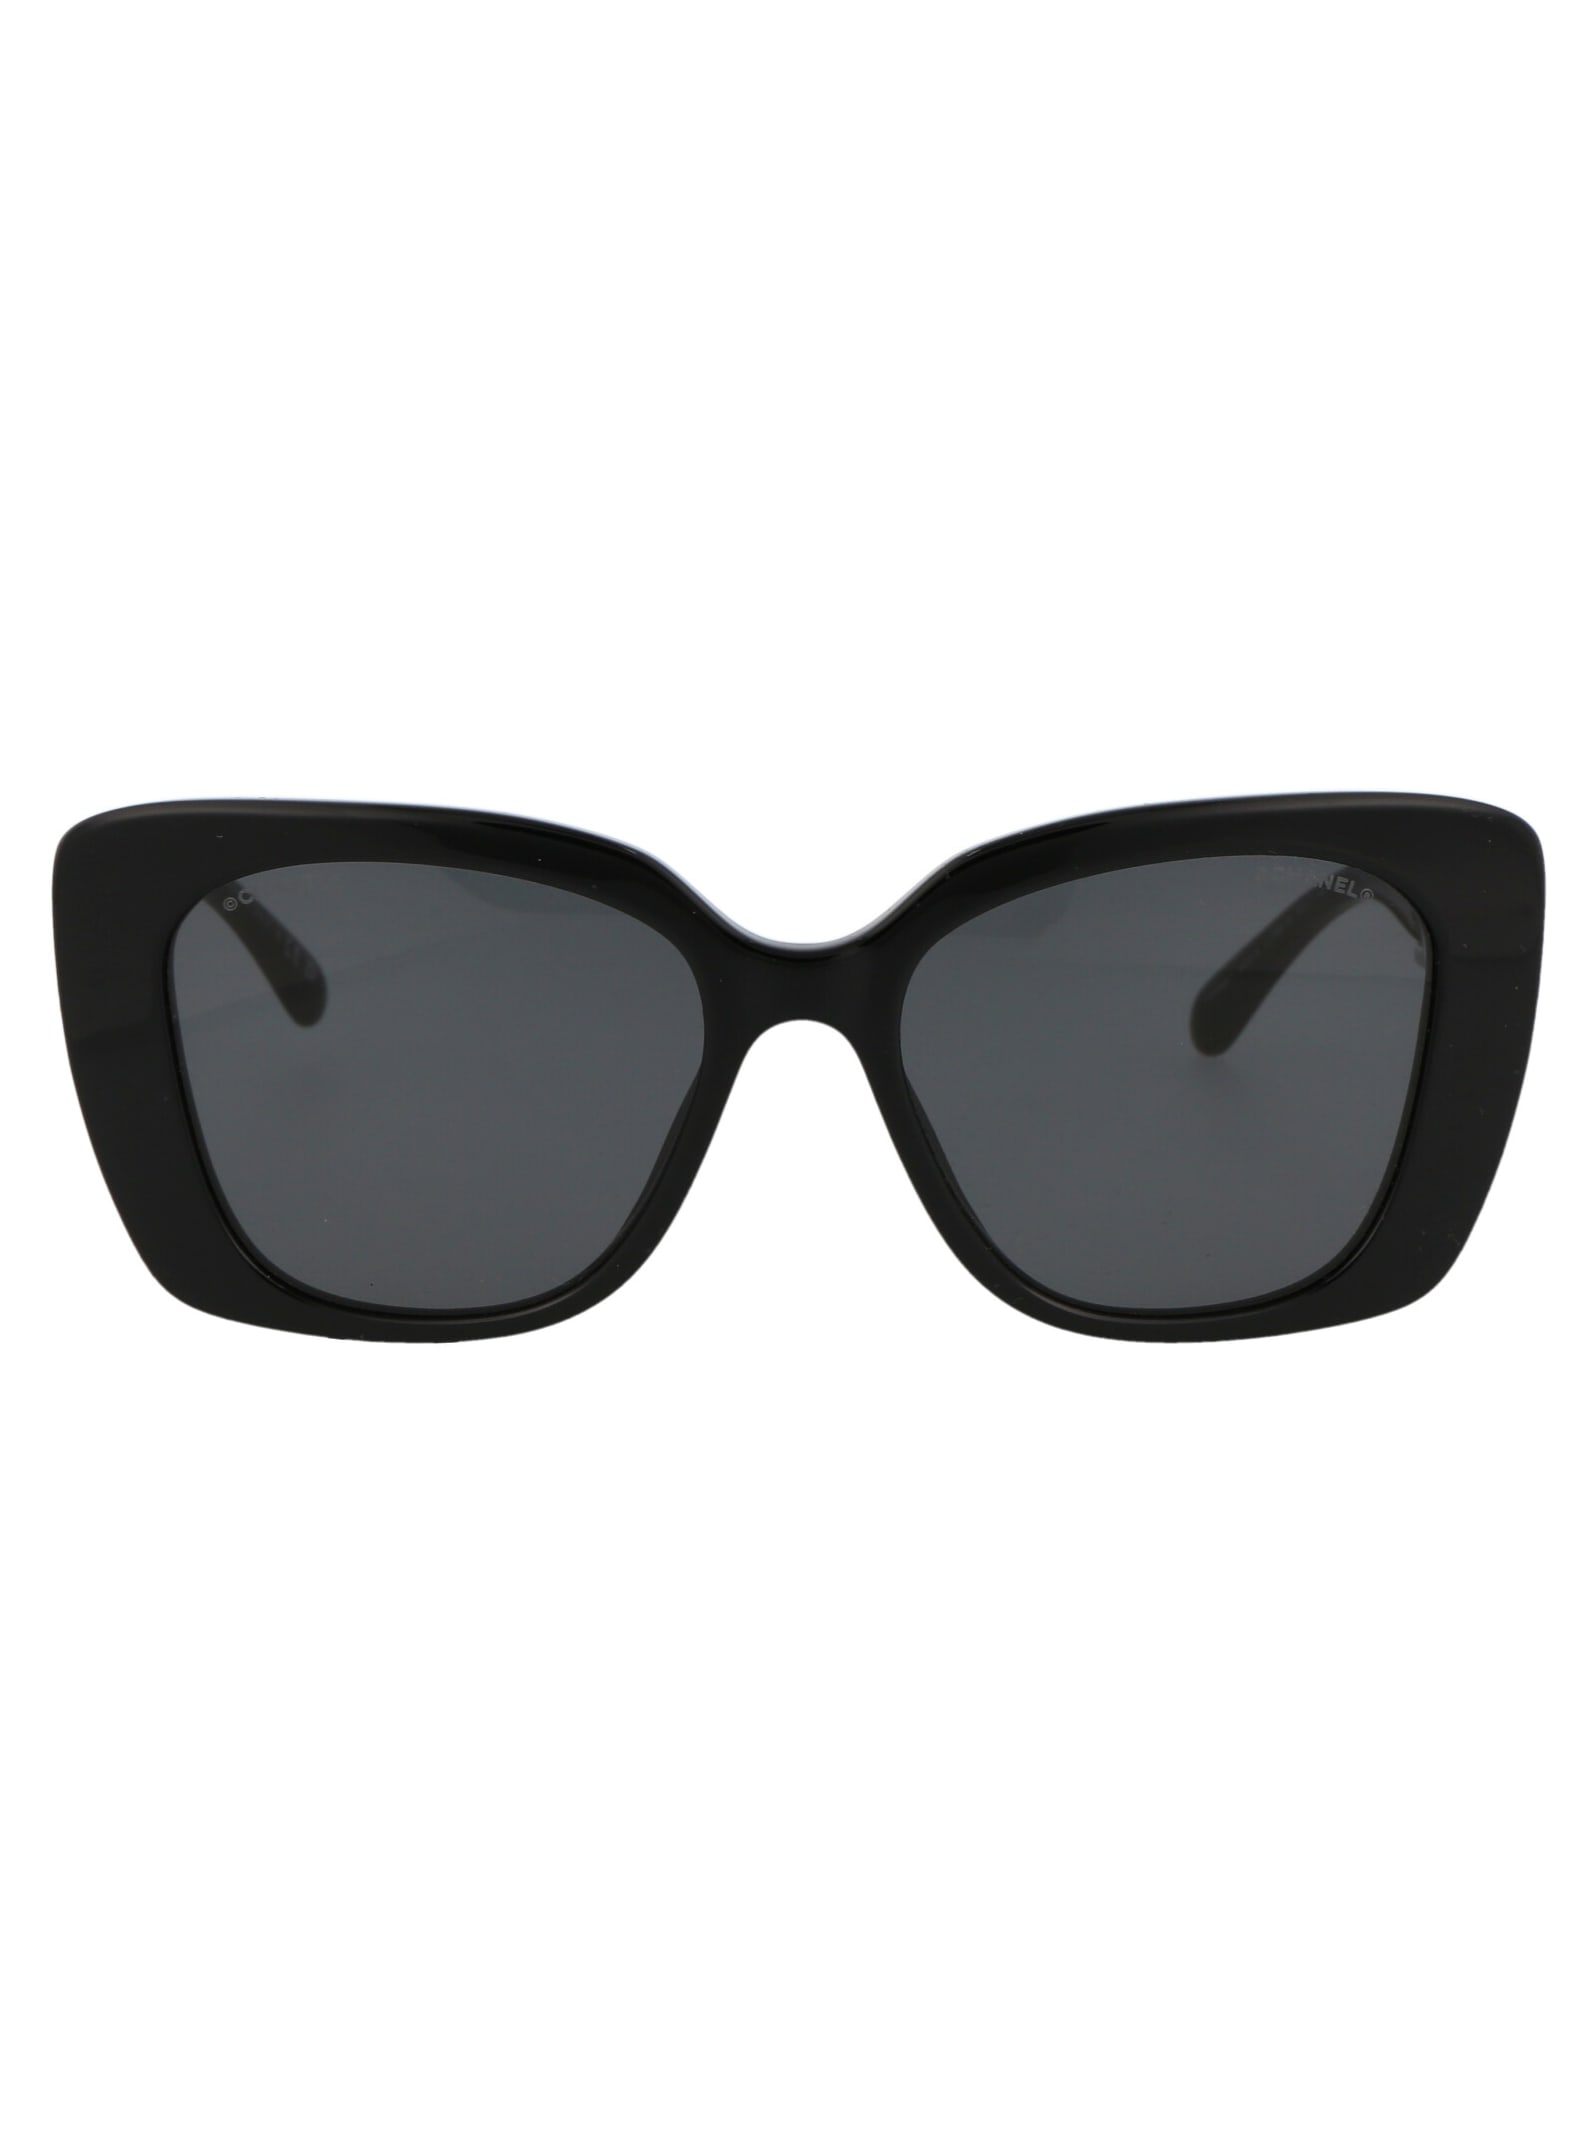 Pre-owned Chanel 0ch5422b Sunglasses In 1026s4 Black